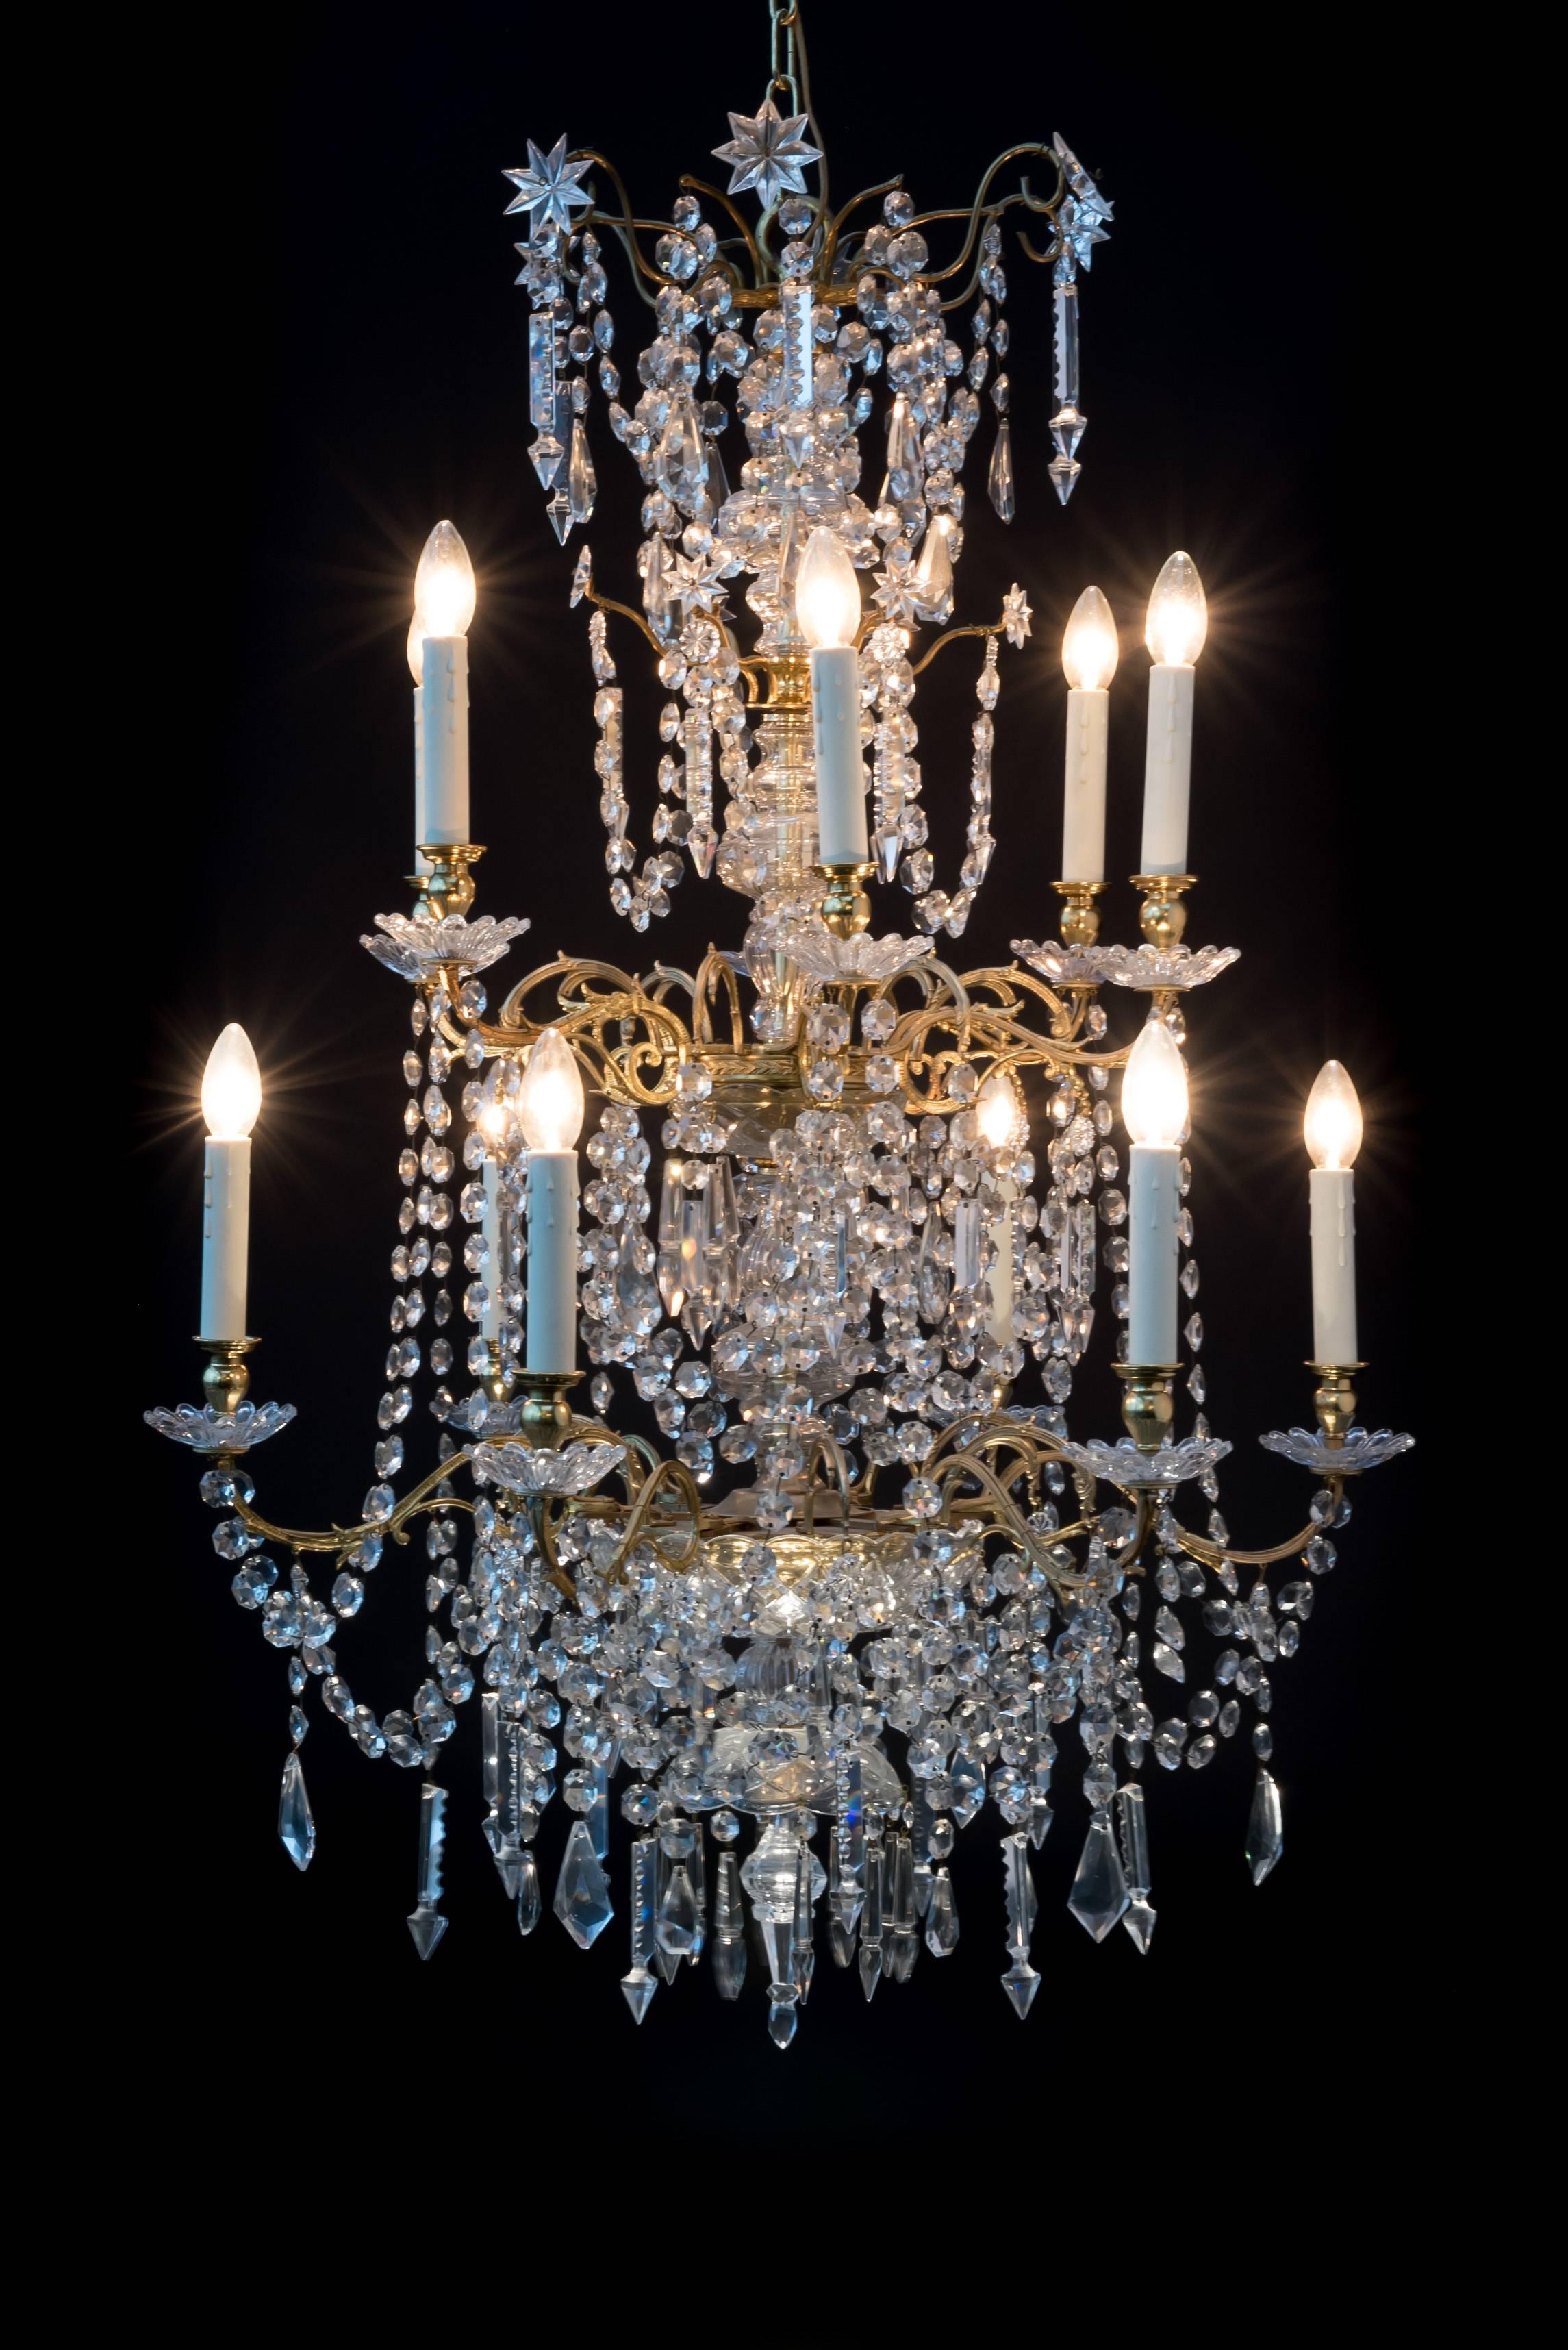 Antique twelve lights chandelier from circa 1790 to 1800.
Slim chandelier in France neoclassical style.
Classic hand-cut crystal and cast bronze parts.
Complete with all the old parts.
Original candle and later converted to electricity.